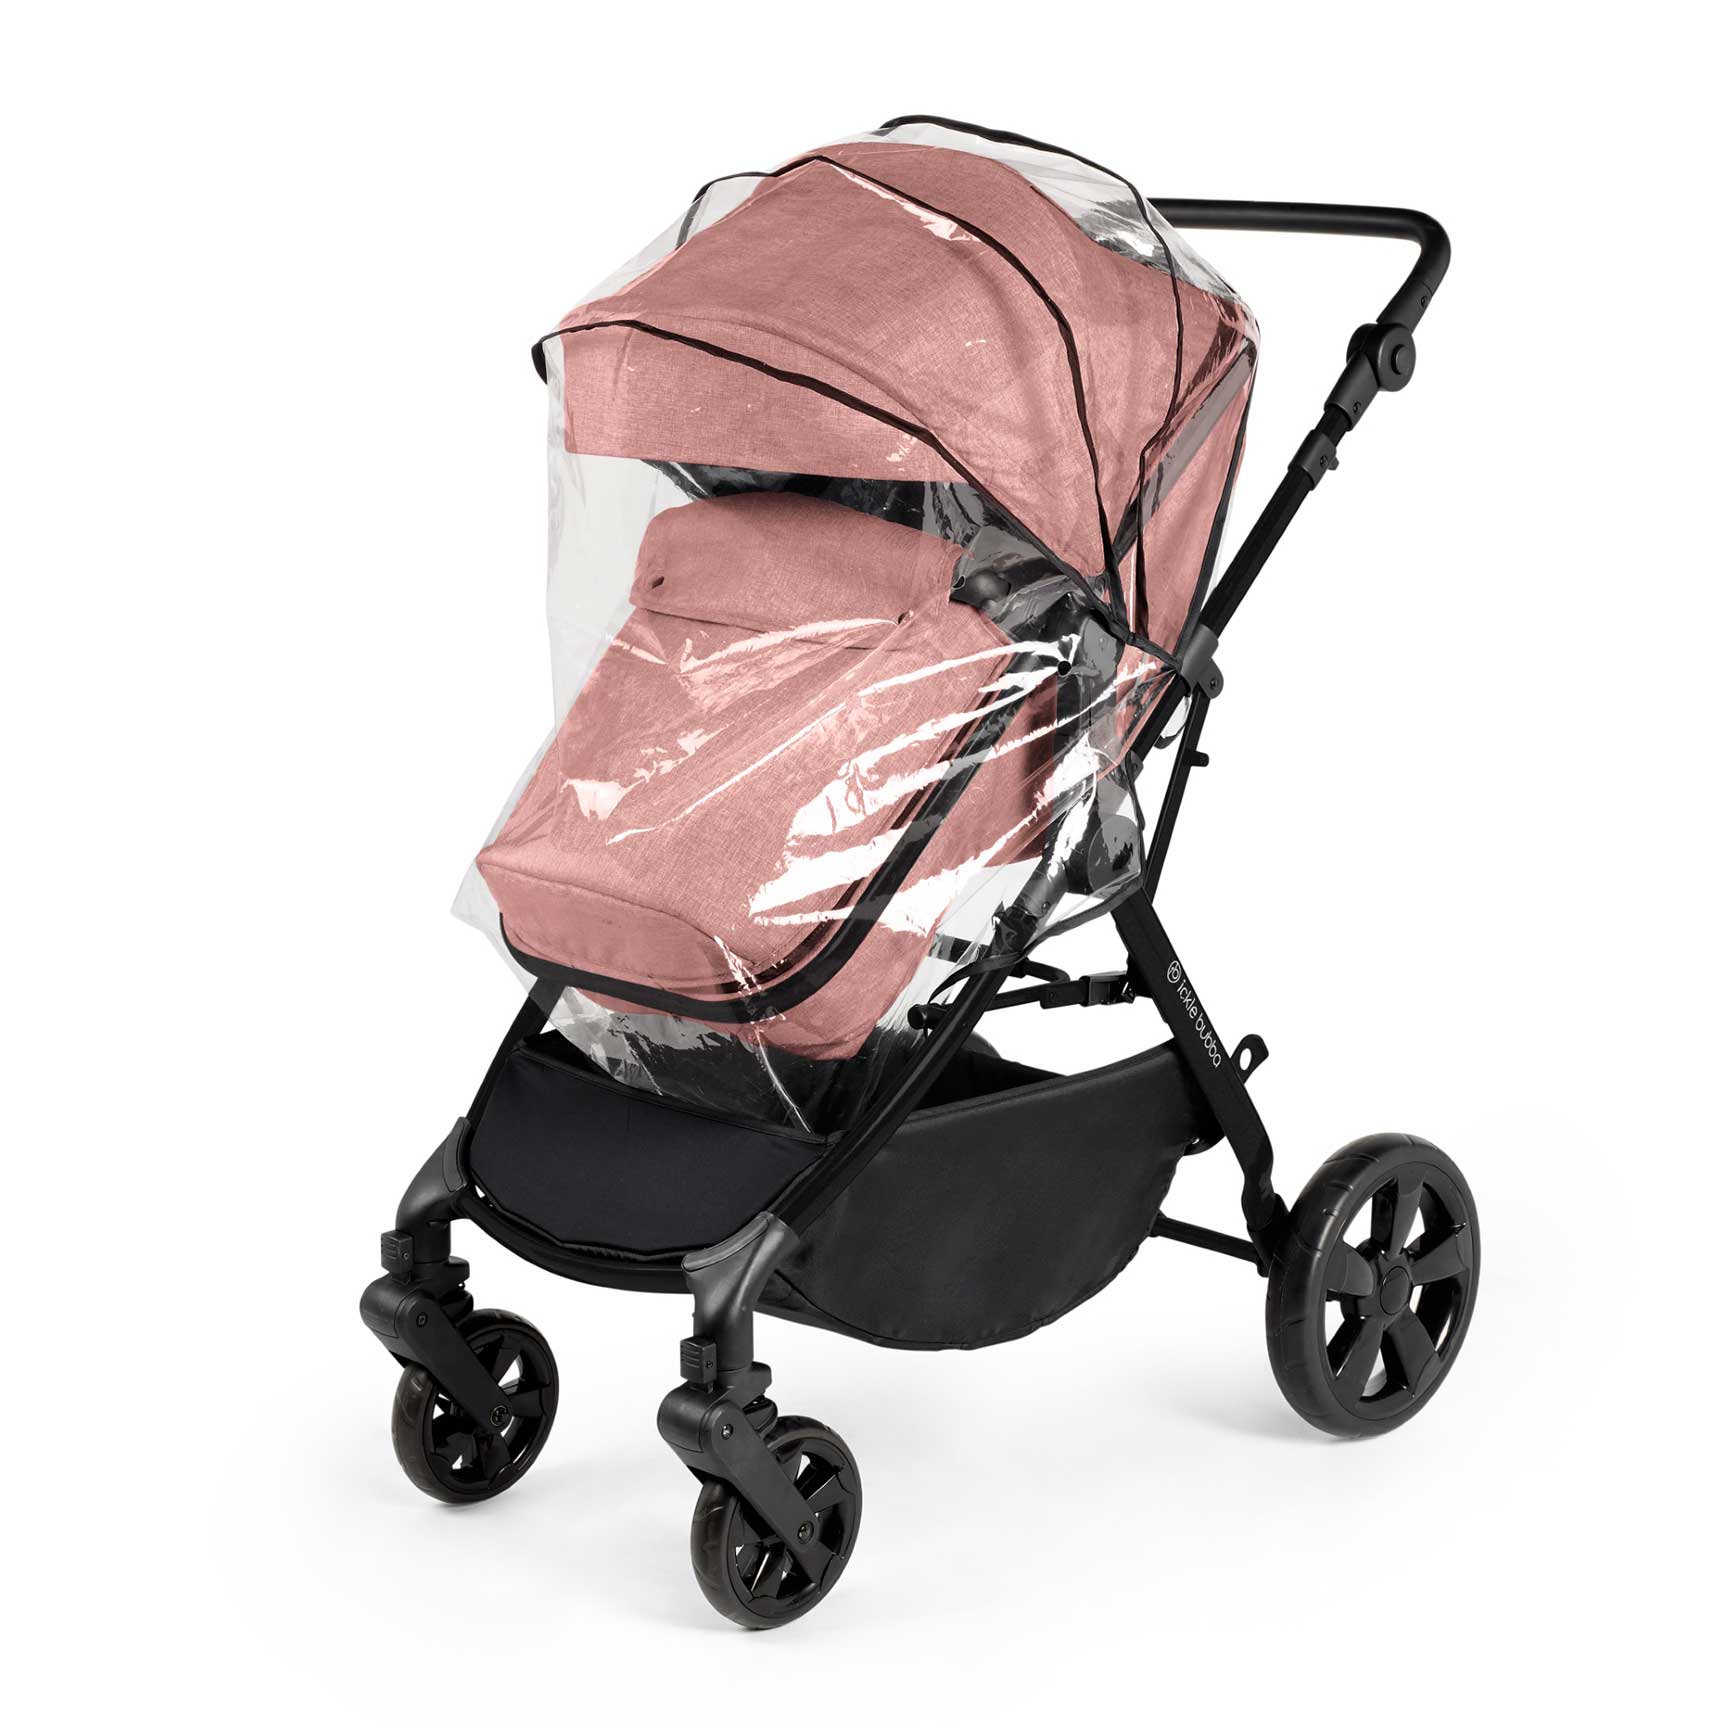 Ickle Bubba Comet All-in-One I-Size Travel System with Isofix Base in Dusty Pink Baby Prams 10-008-300-134 5056515025811